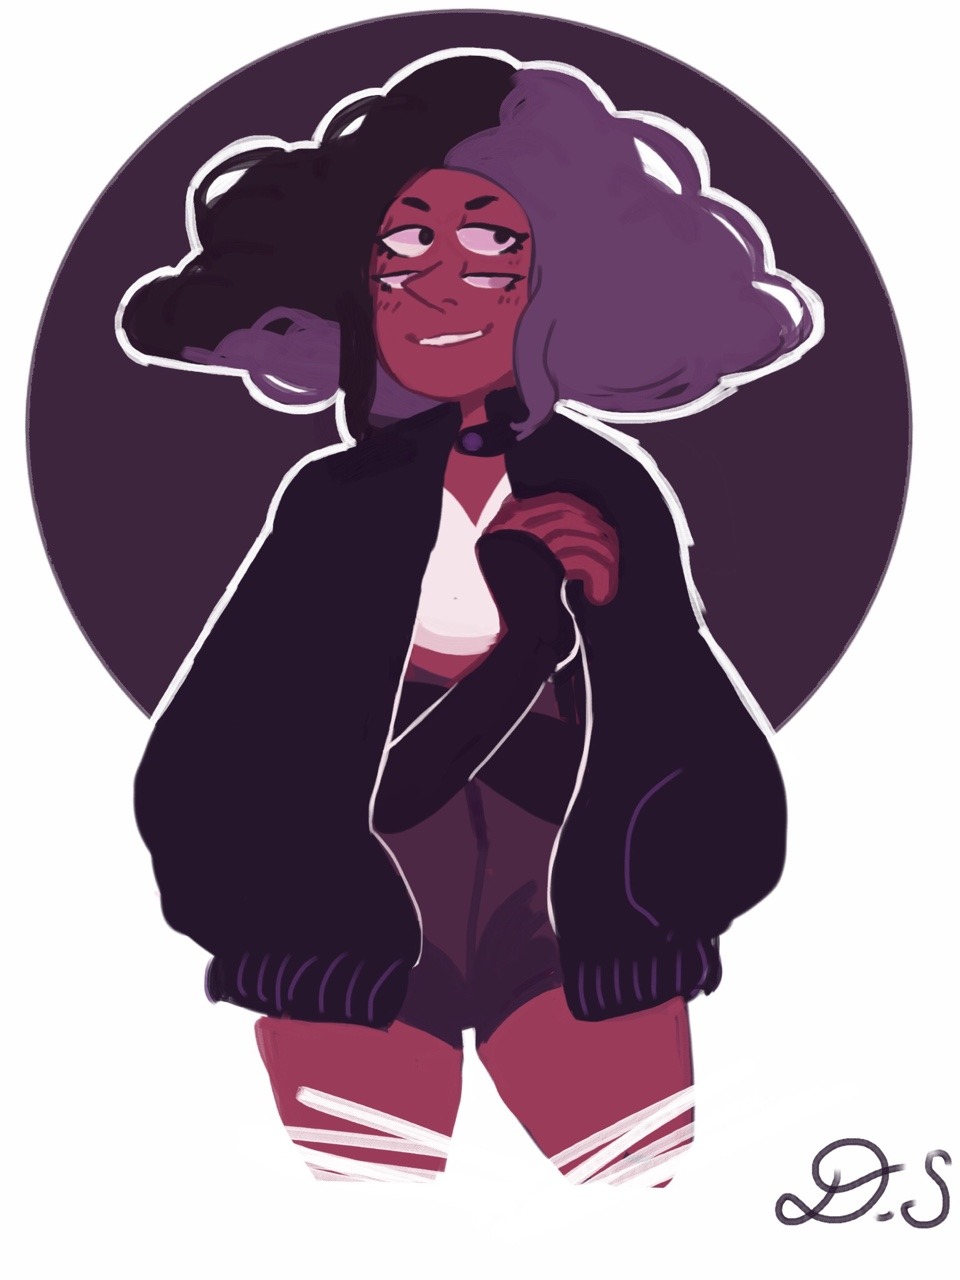 Rhodonite from Steven universe Hey tumblr community I will be drawing the gems in fashion clothing I wanna know what gem I should draw next write down in the comment